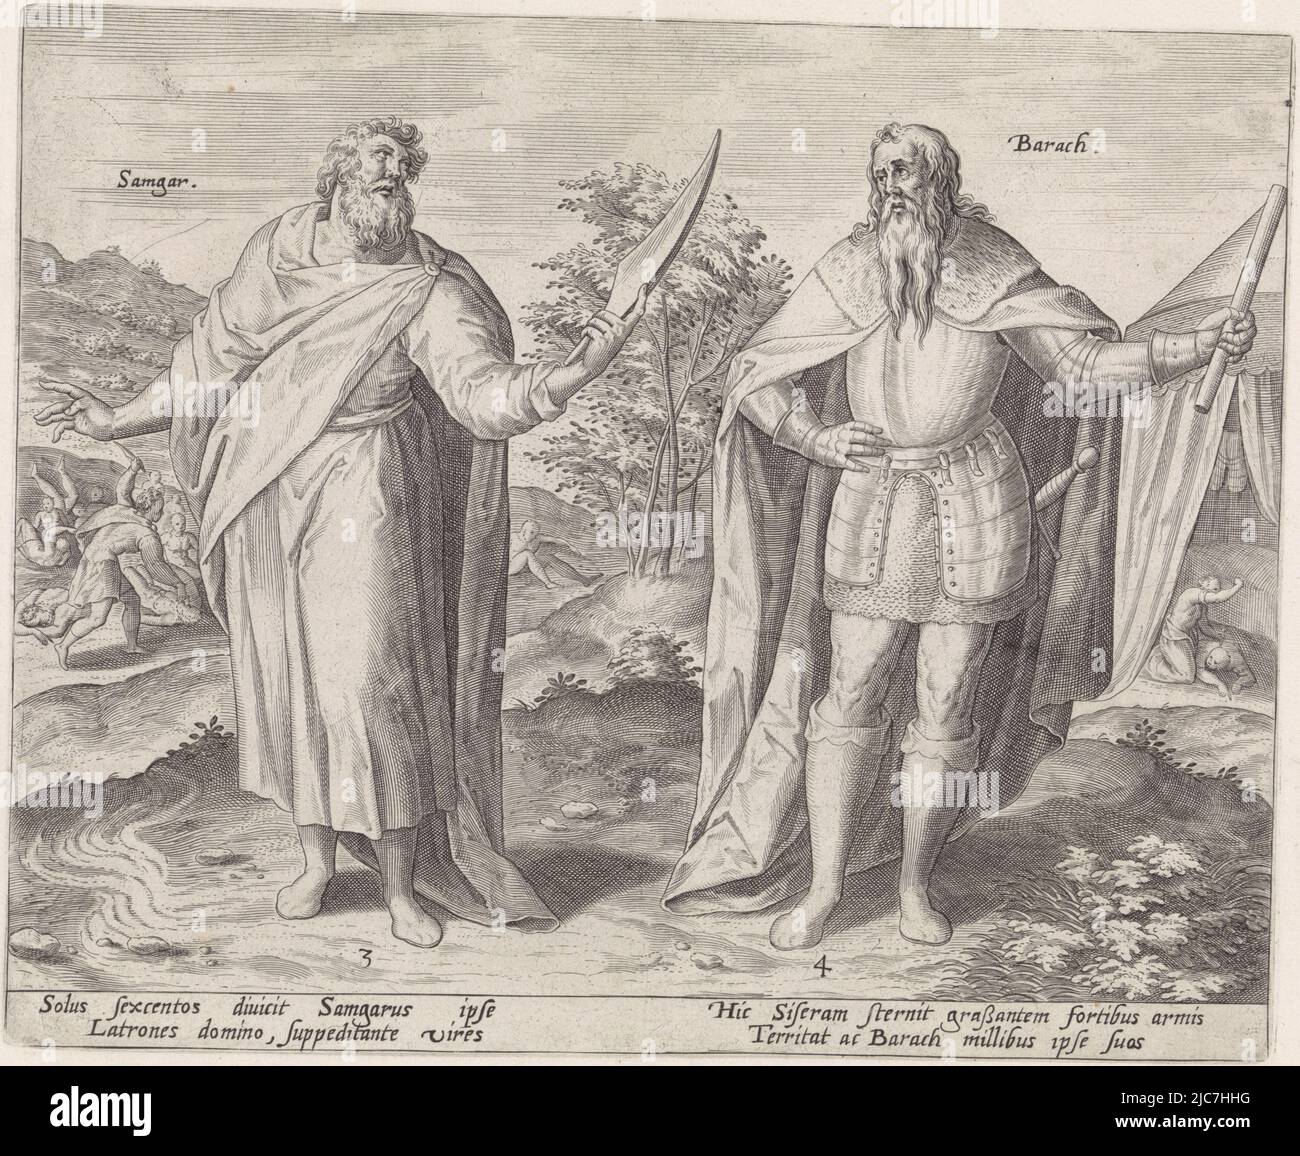 The Judges Samgar and Barak. Samgar holds an ox prod in his hand and in the background he kills six hundred Philistines with it. Barak is dressed in armor and holds a scepter in his hand. In the background on the right, Jael kills Sisera by driving a tent pole through his head as he sleeps. Below the image explanatory texts in Latin. Samgar and Barak The twelve judges of Israel Thesaurus sacrarum historiarum veteris testamenti , print maker: Hans Collaert (I), (attributed to), Jan Snellinck (I), publisher: Gerard de Jode, Antwerp, 1579 and/or 1585, paper, engraving, h 214 mm × w 261 mm Stock Photo